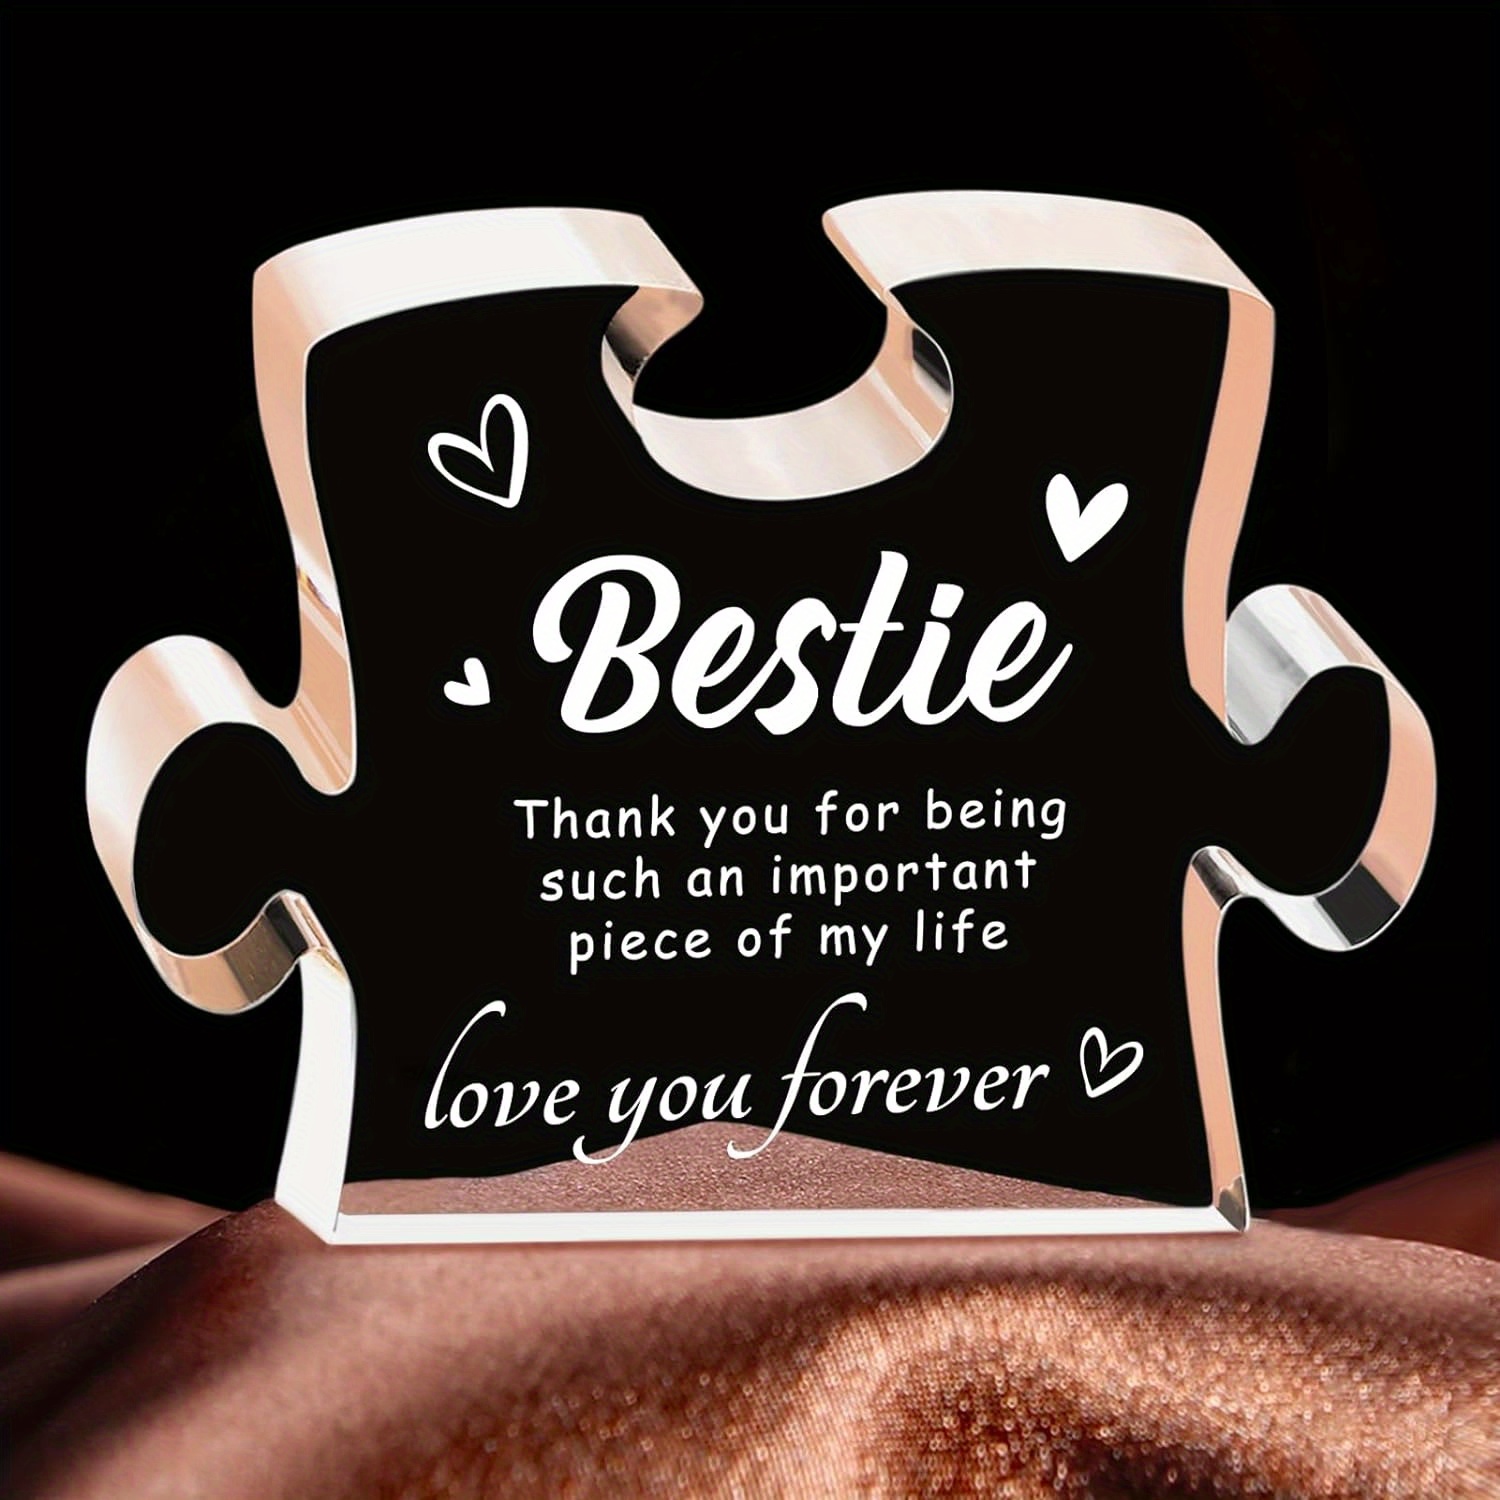 1pc acrylic bestie appreciation puzzle piece plaque friendship thank you gift birthday graduation present for best friend bff for home room living room office decor spring easter gift